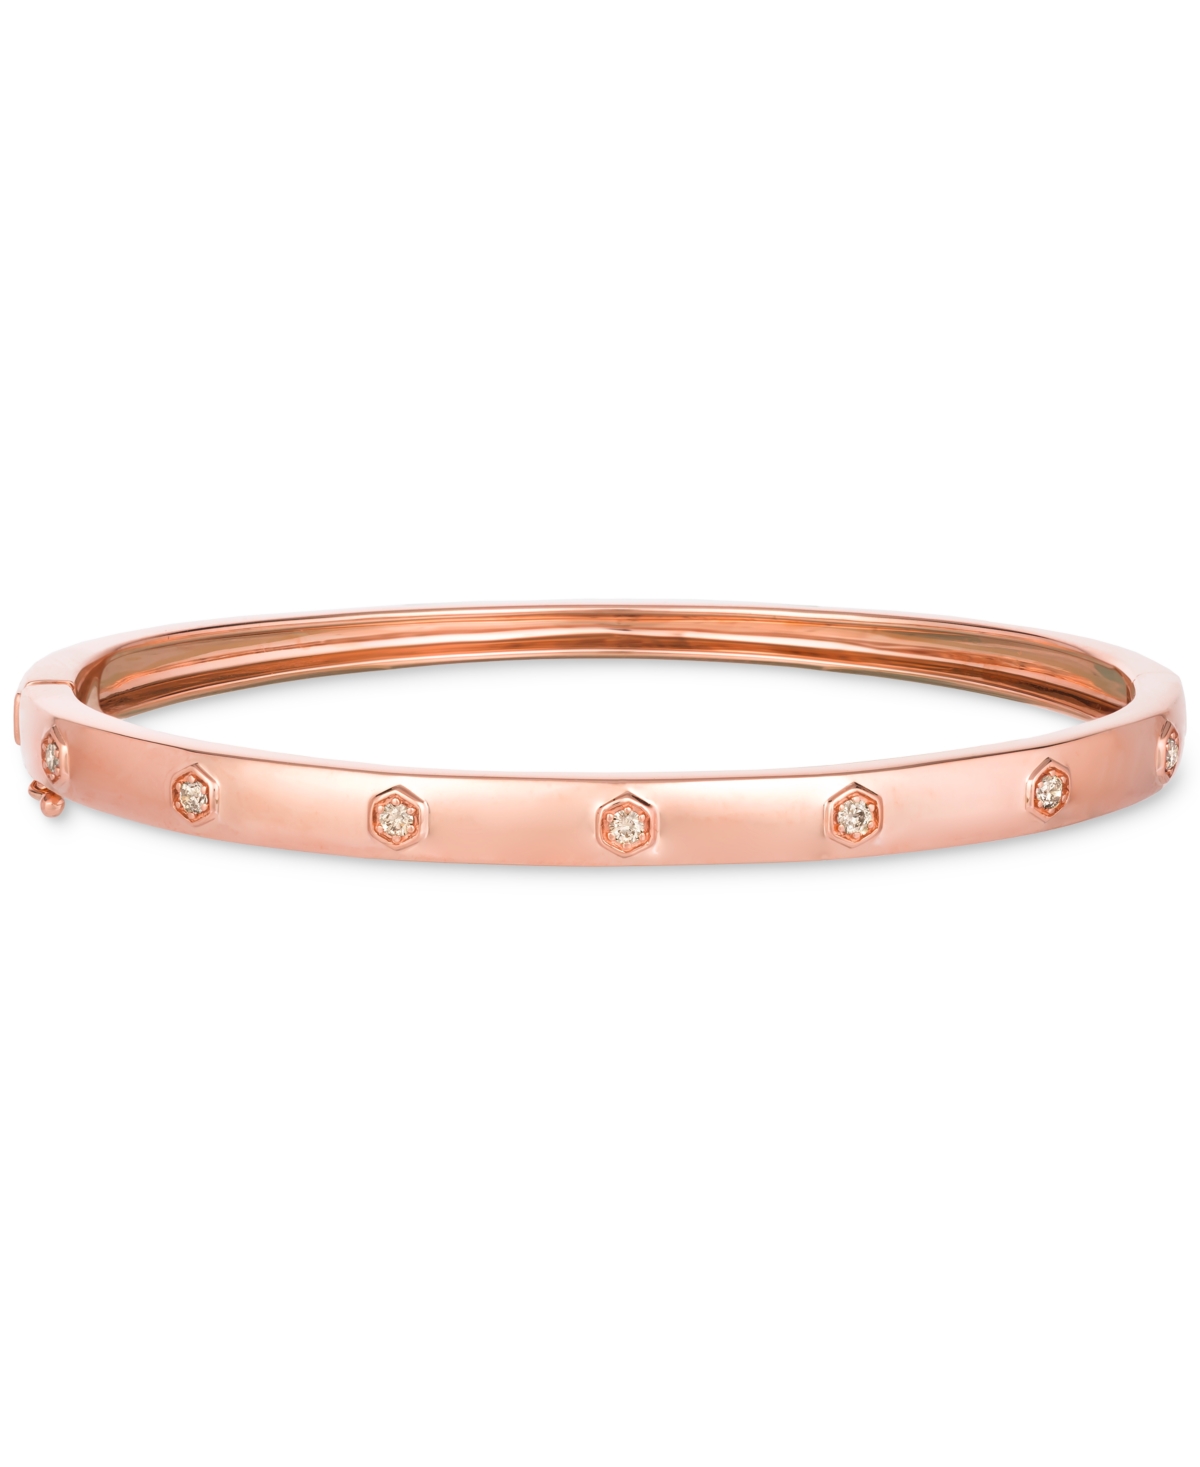 Anywear Everywear Nude Diamond Bangle Bracelet (1/5 ct. t.w.) in 14k Gold (Also Available in Rose Gold or White Gold) - K Strawberry Gold Bang